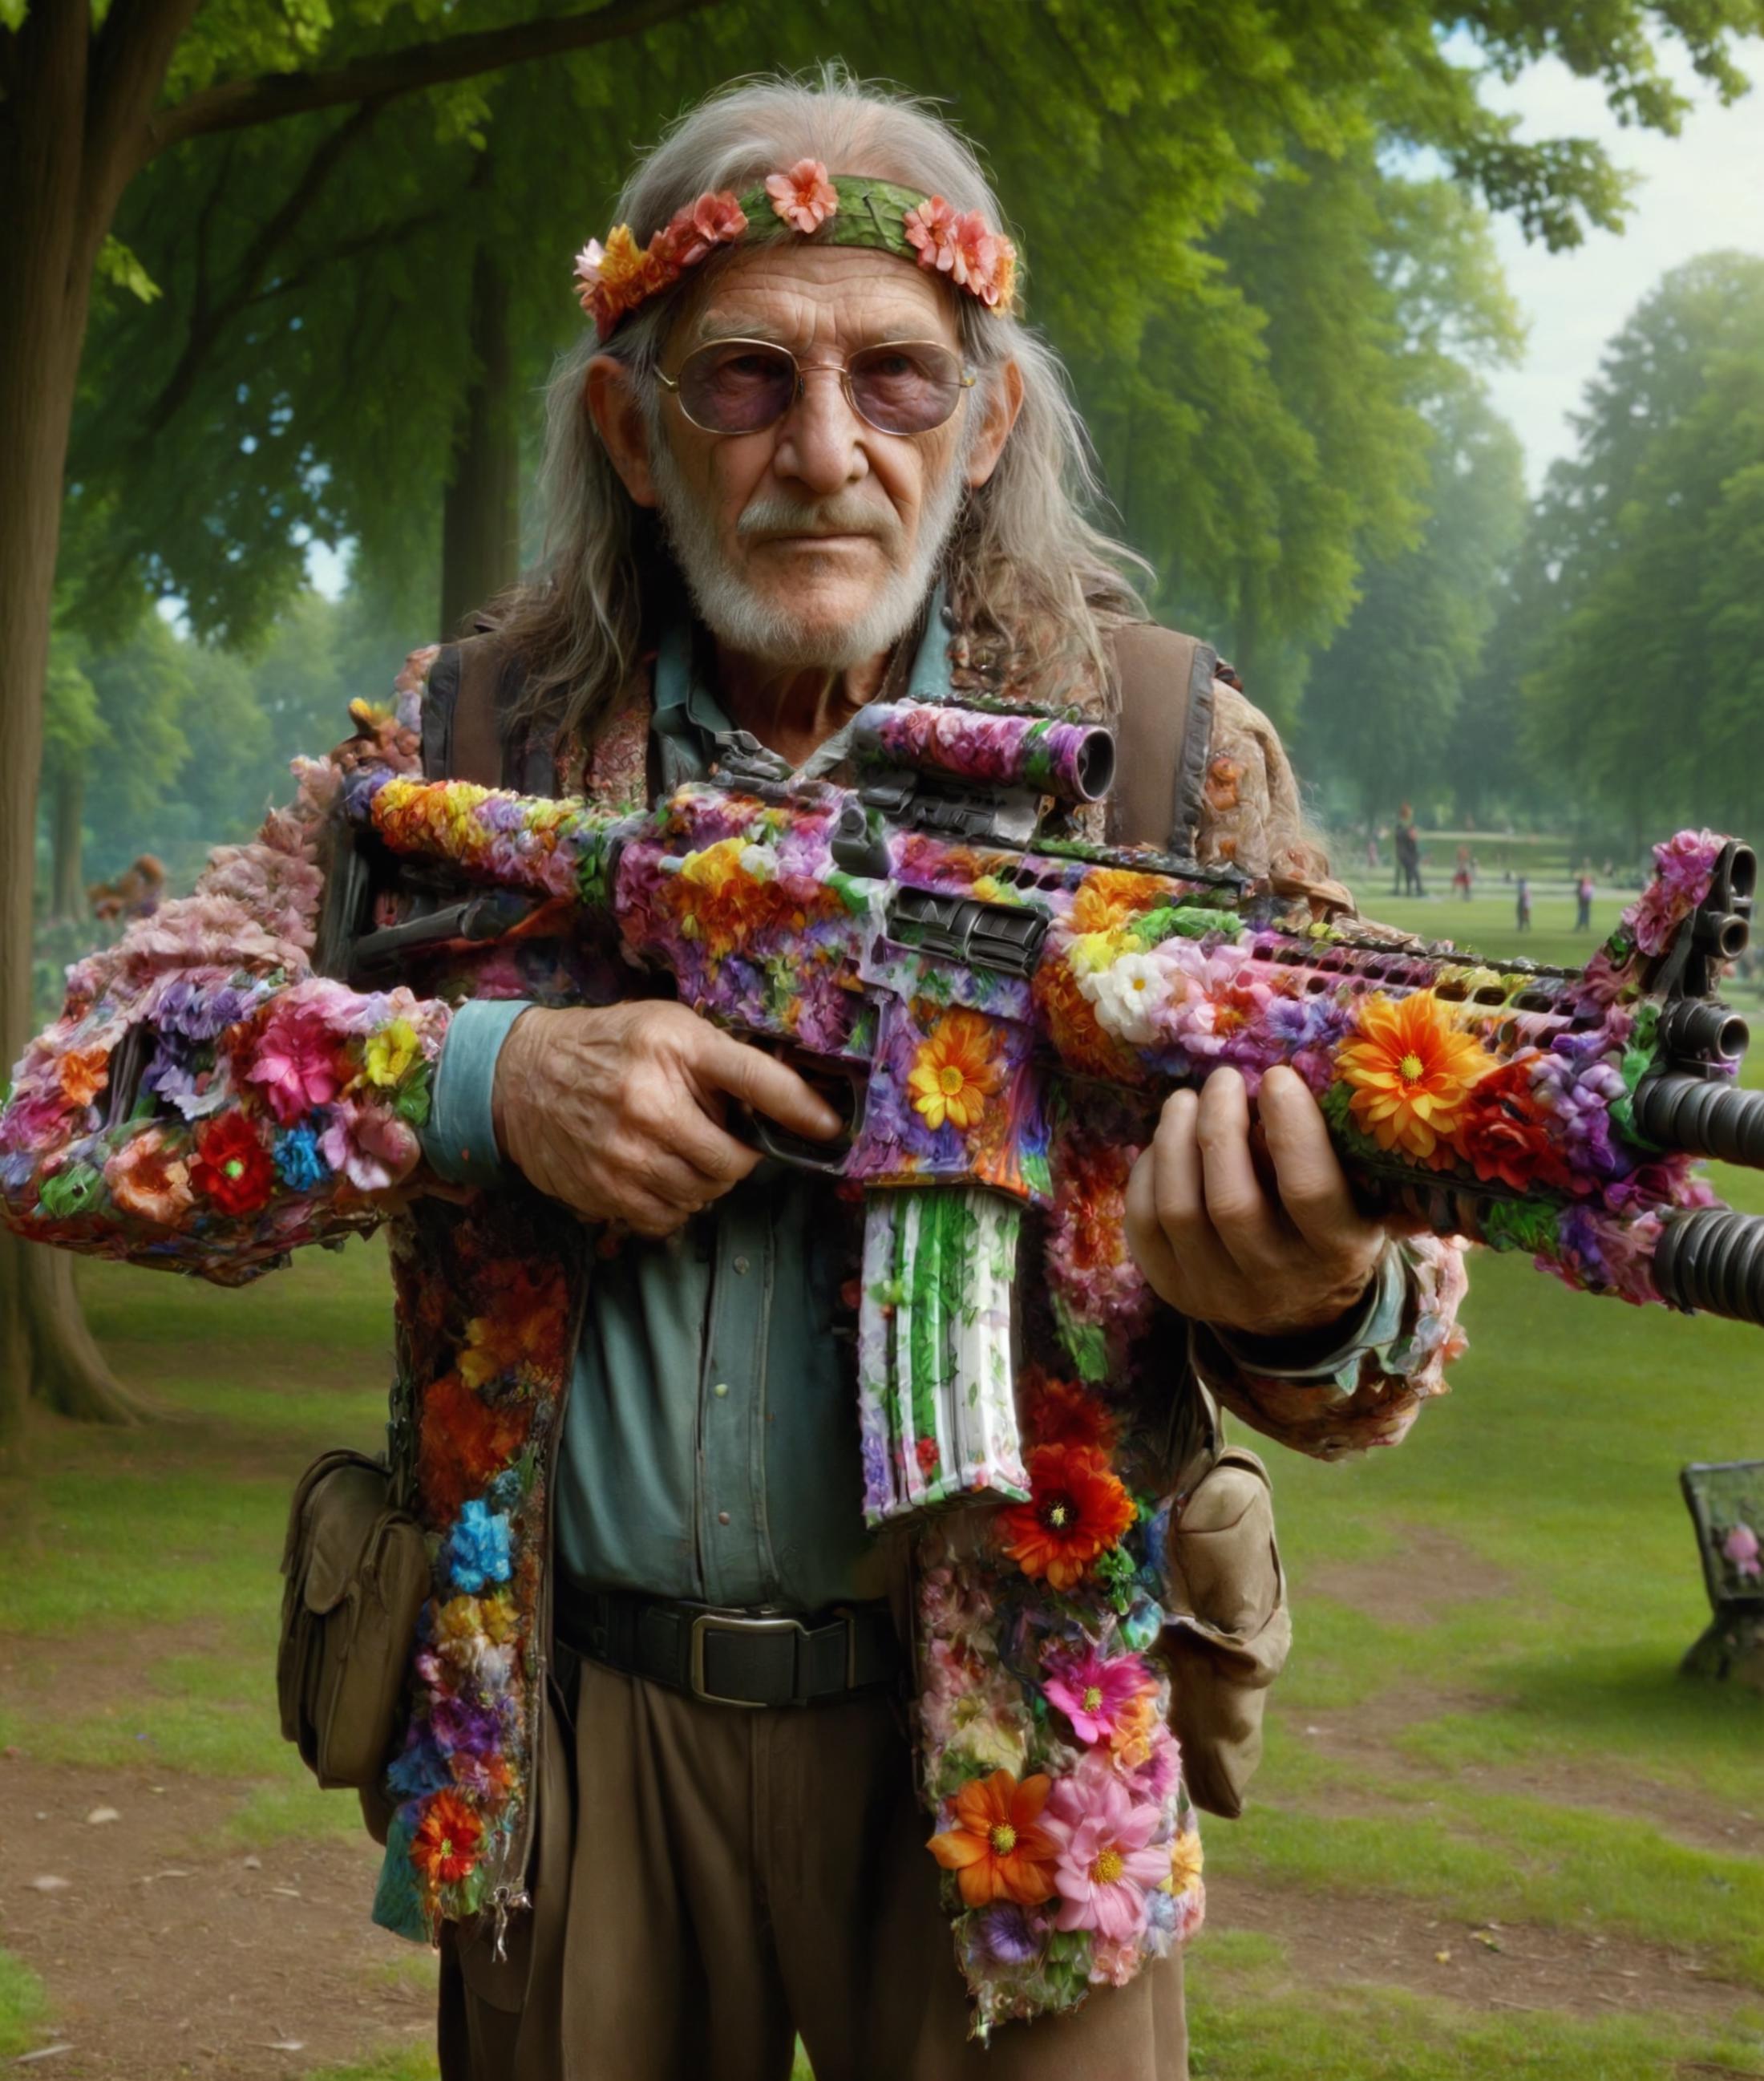 An old man with a flowered hat and a rainbow-colored gun.